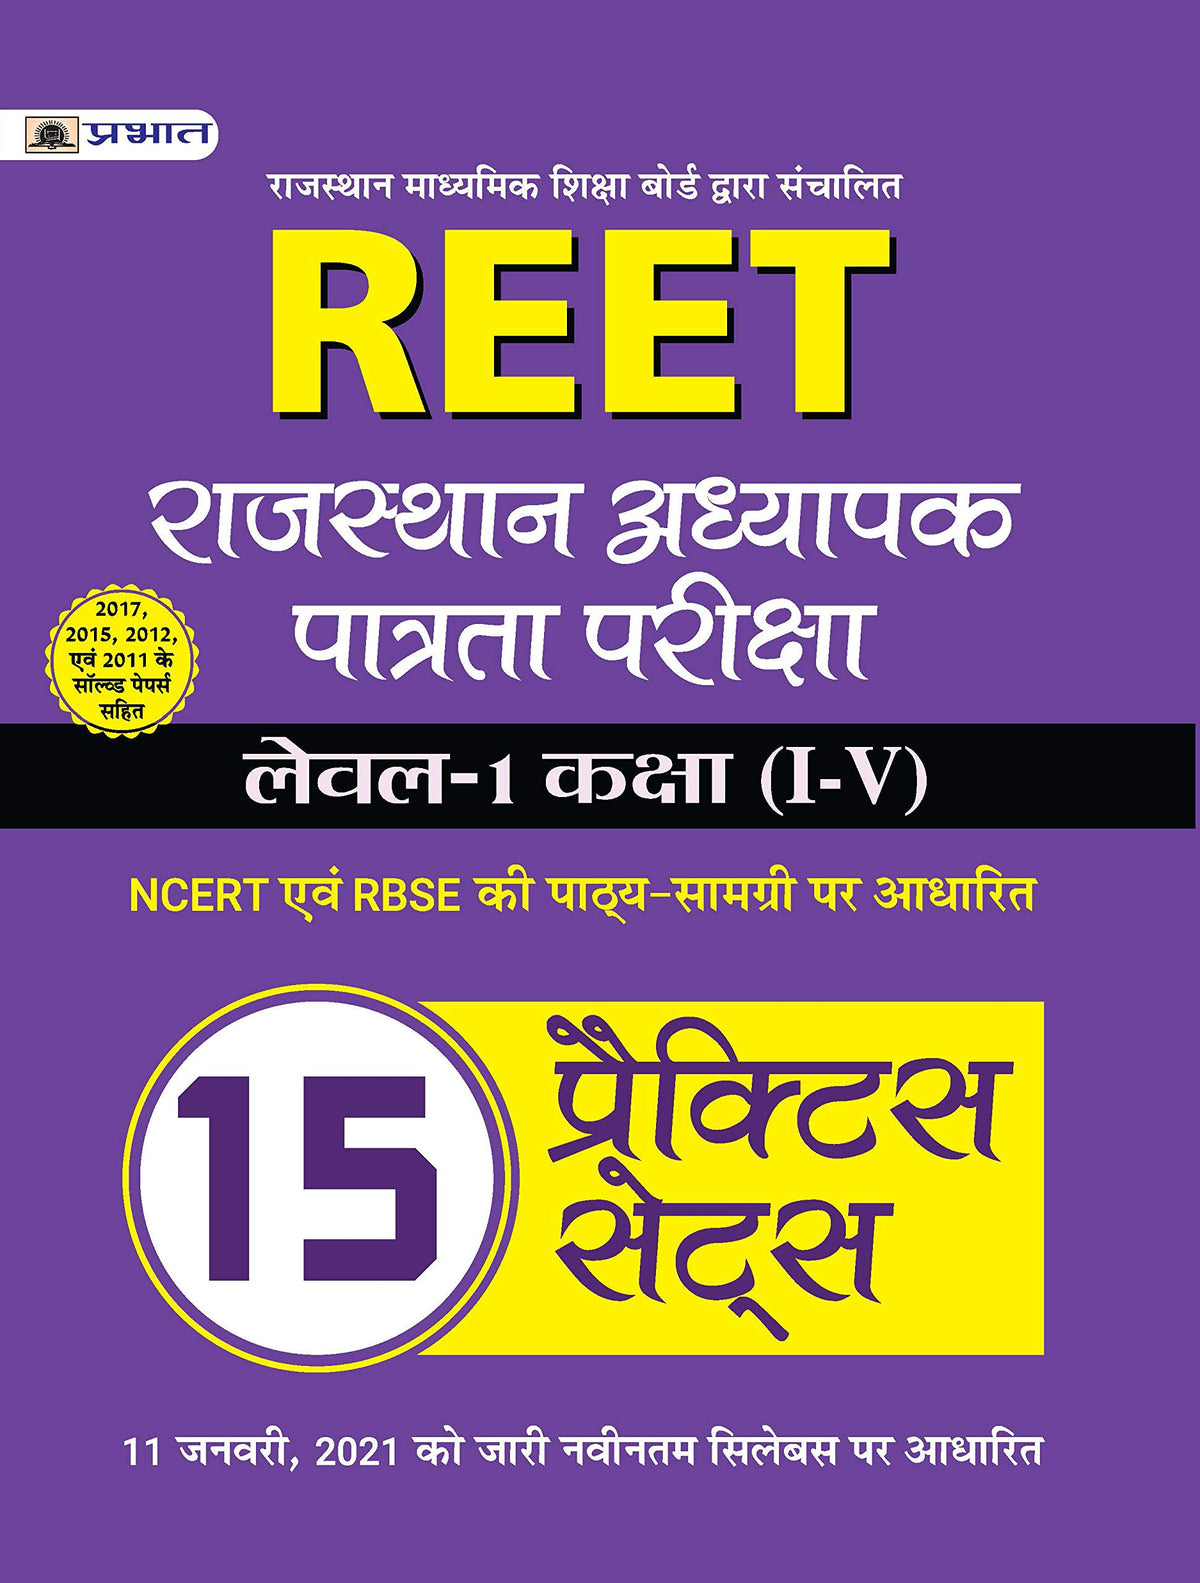 REET (RTET) Level-1 All Subjects Practice Sets Book For 2021 (Strictly on 11th Jan 2021 new syllabus) (Hindi)